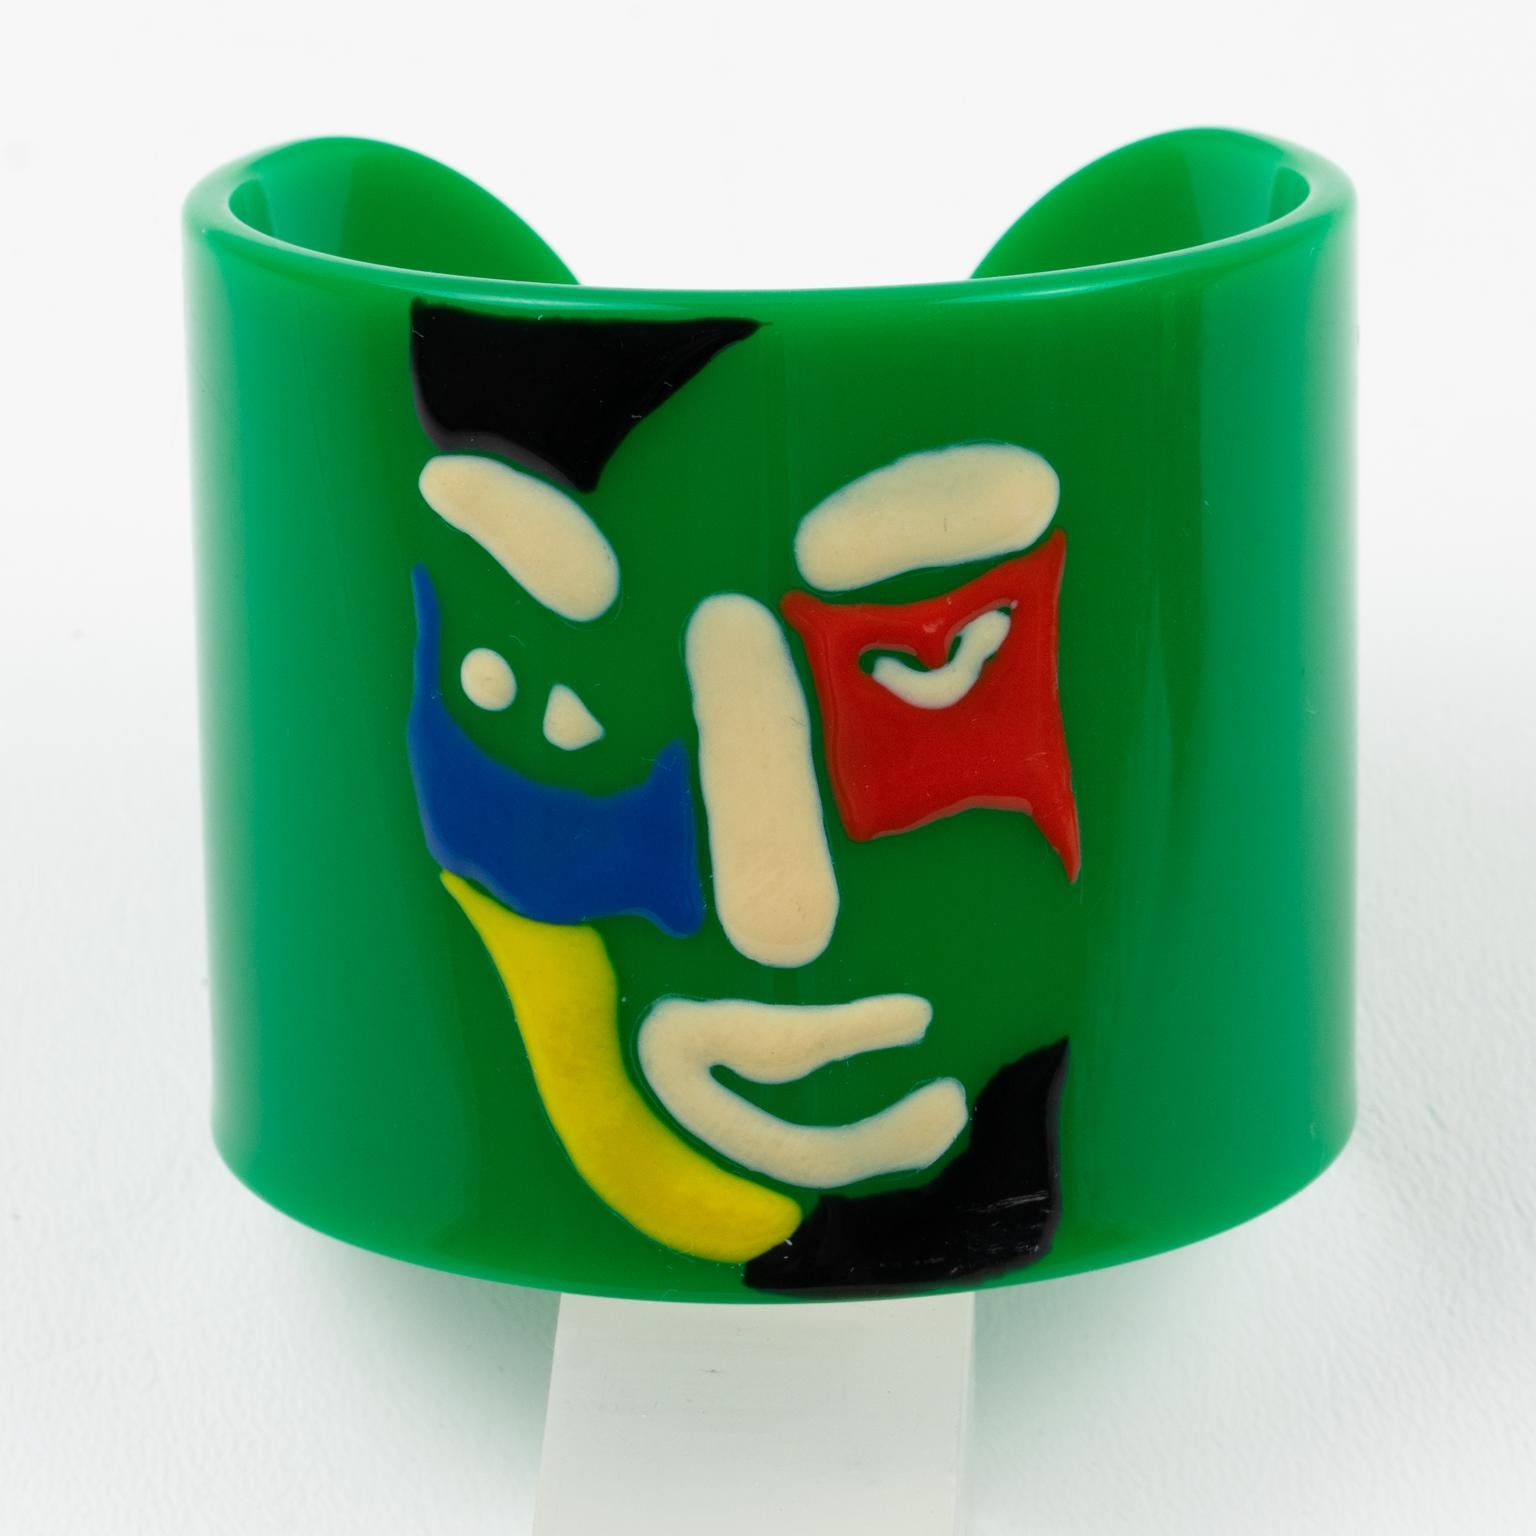 Missoni Italy 1980 Green Resin Cuff Bracelet with Multicolor Iconic Smiling Face 3